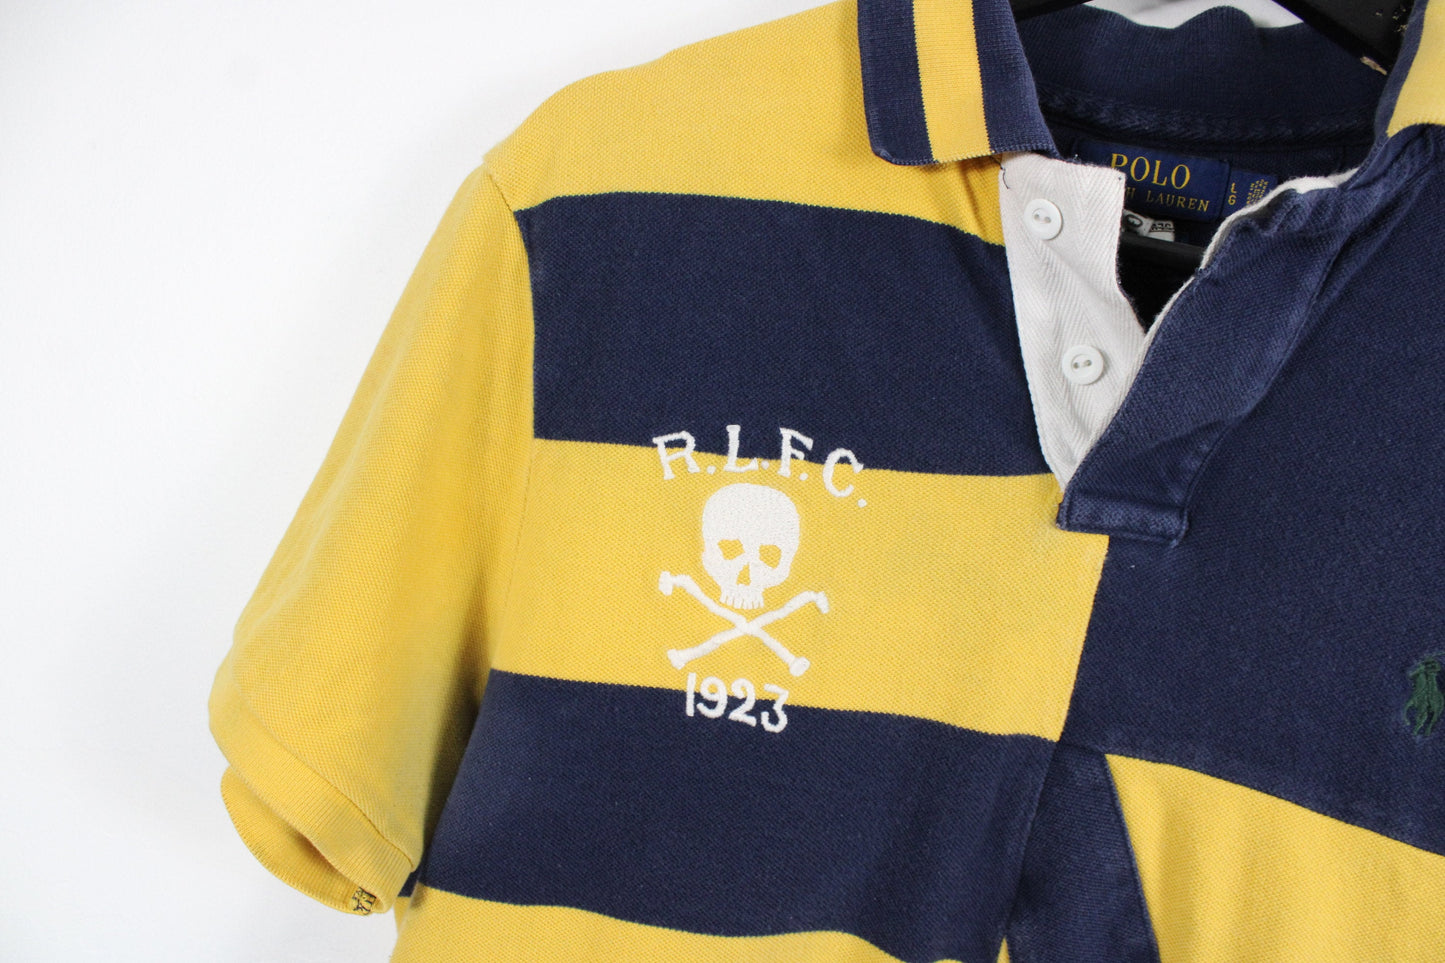 Polo Rugby Shirt / 90s Vintage Ralph Lauren Top / Hip Hop Clothing / Streetwear